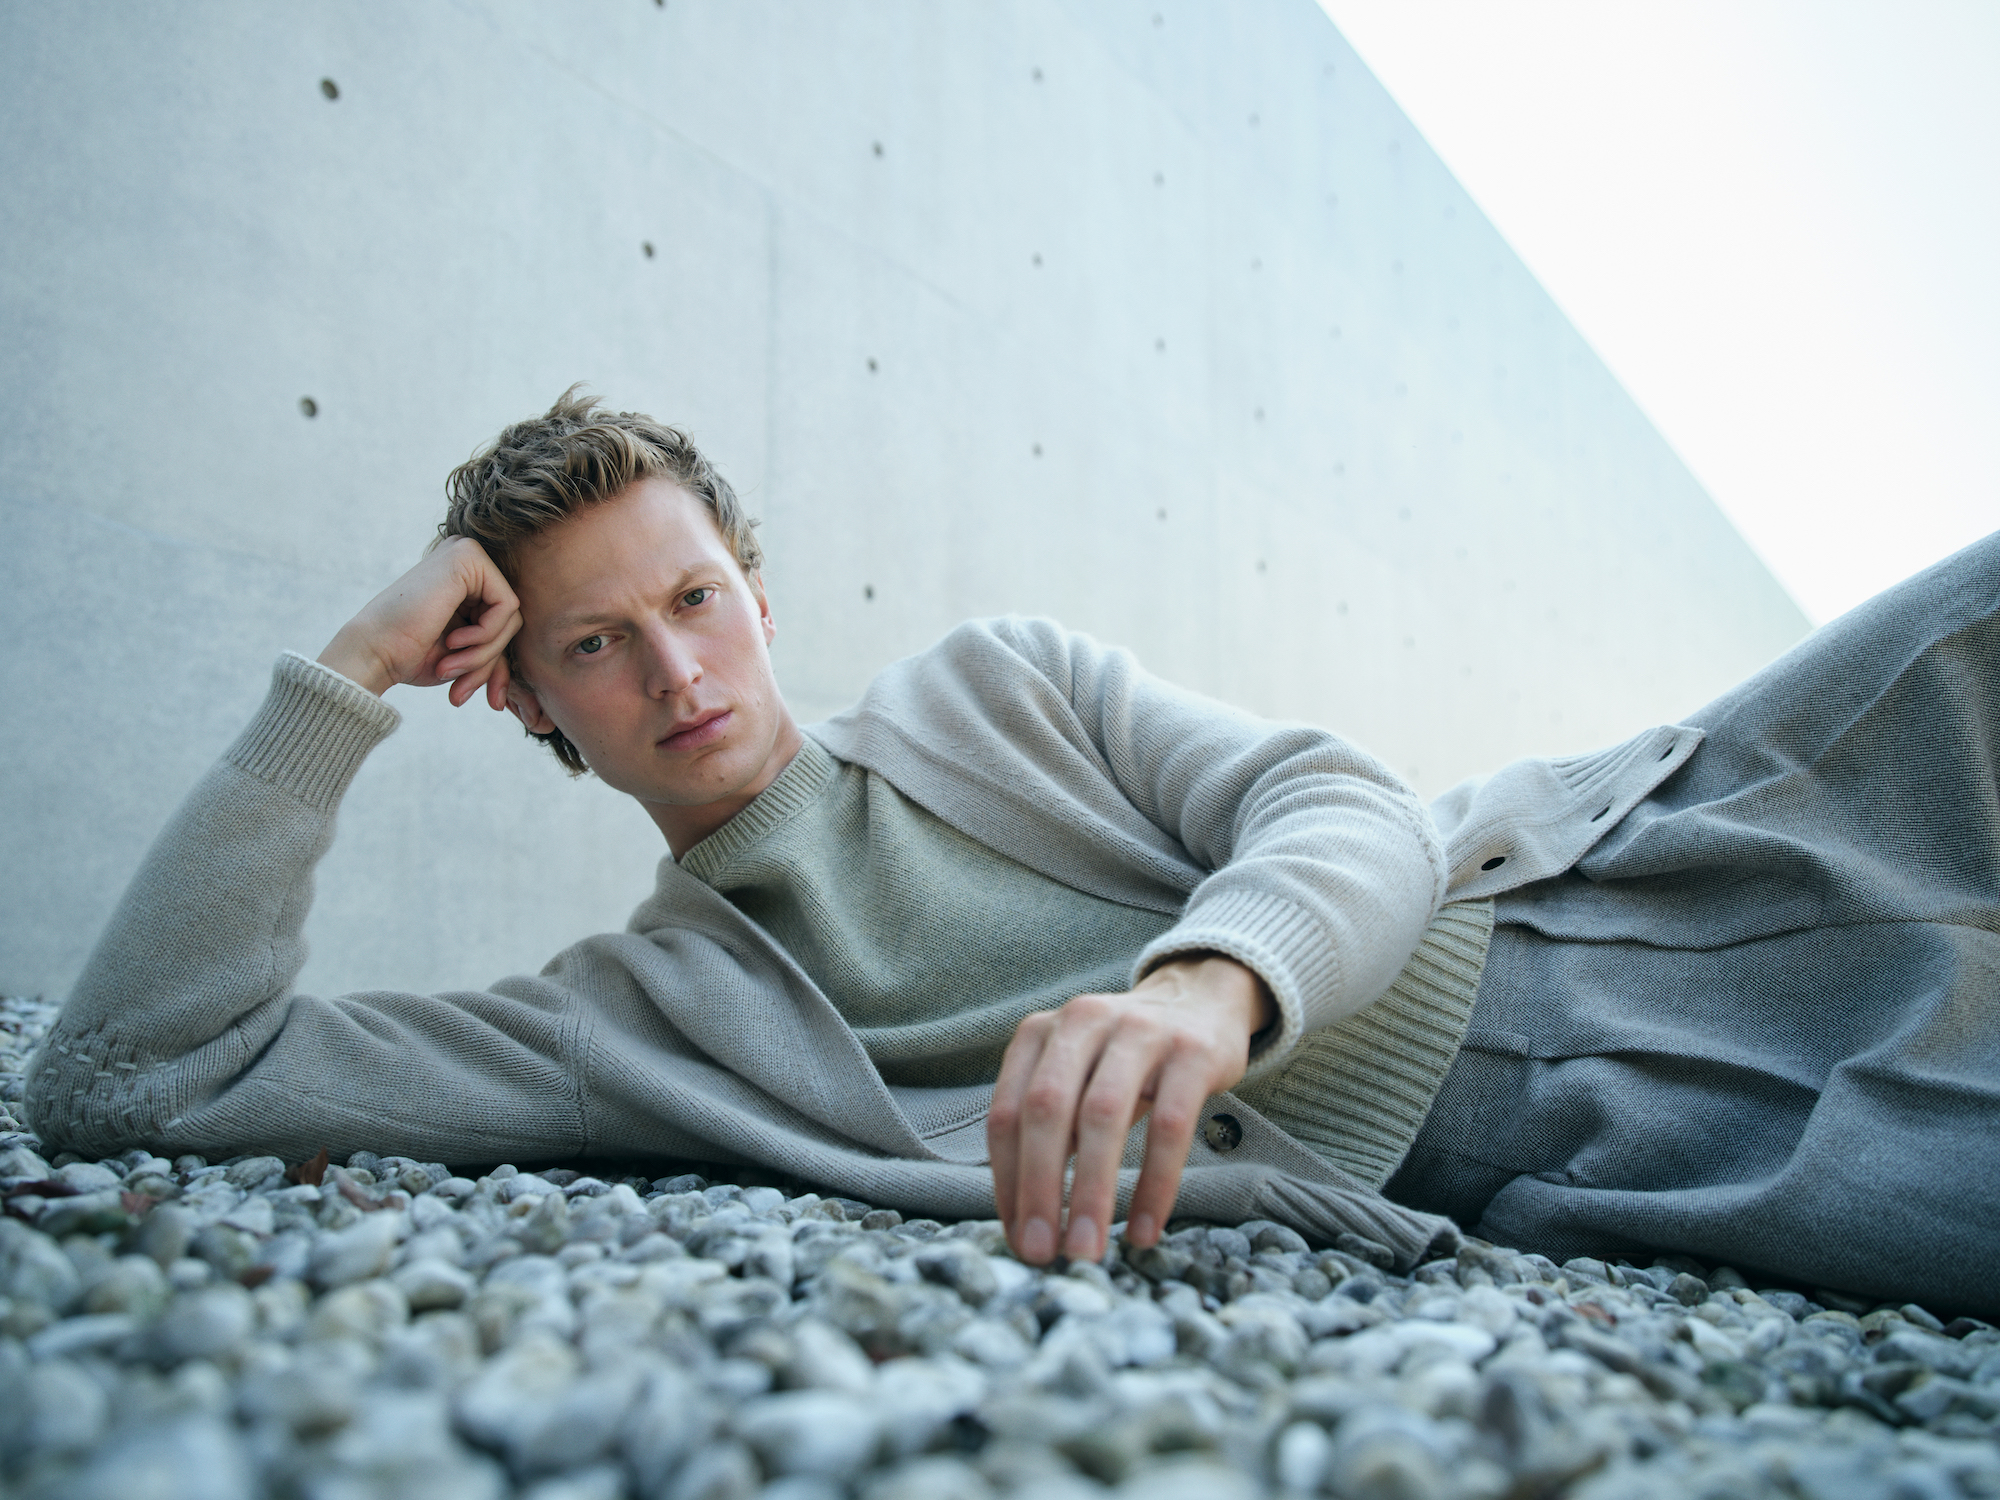 A male model lies on a pebble ground, leaning against a concrete wall, dressed in Loro Piana's comfortable knitwear and trousers, exuding a peaceful and stylish demeanor.